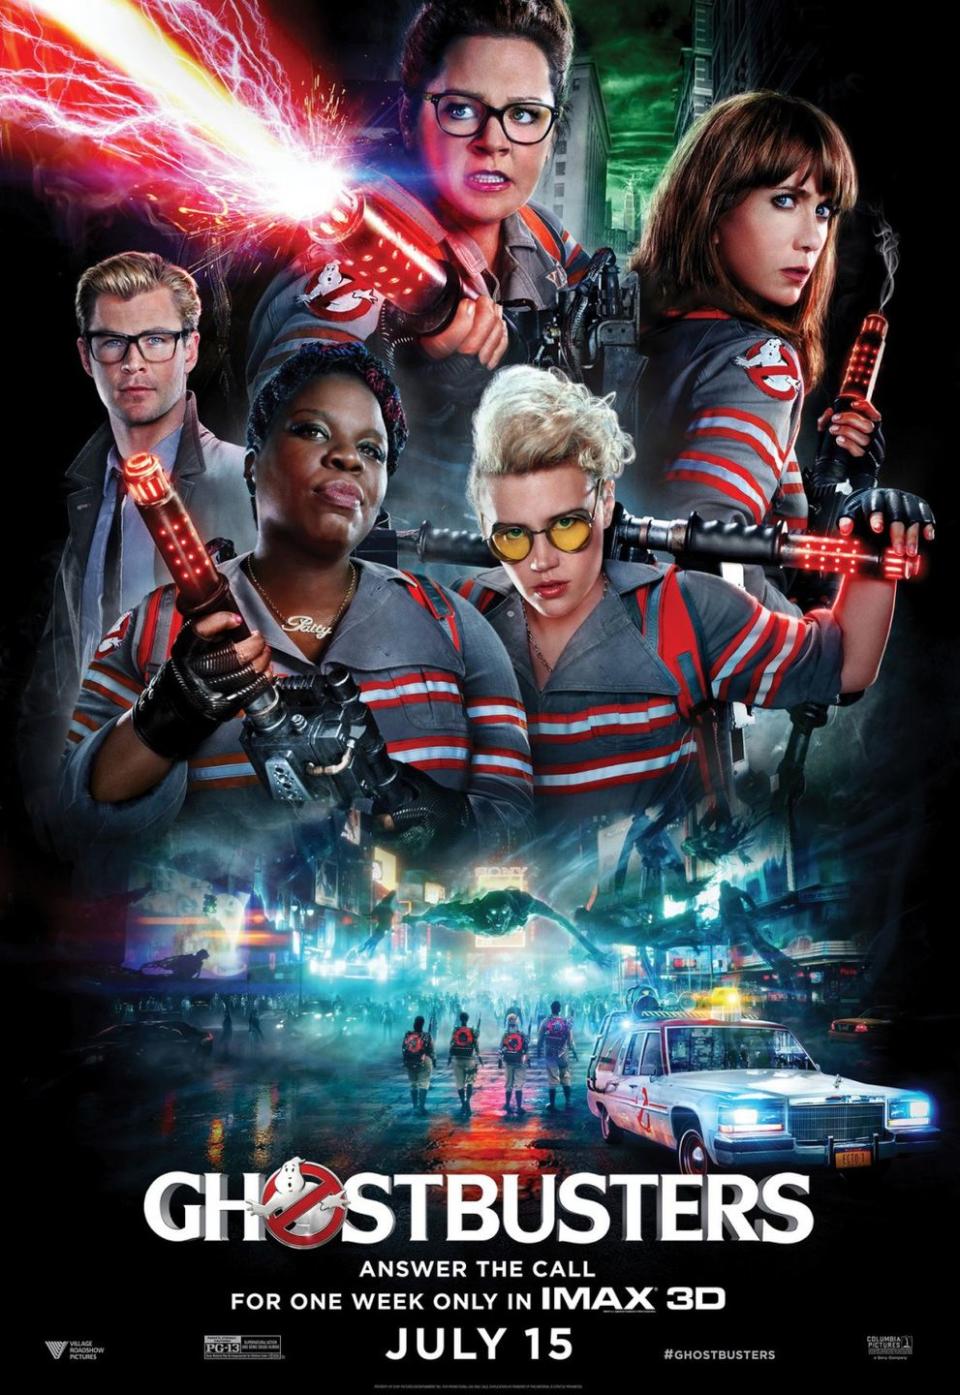 45) Ghostbusters (2016)